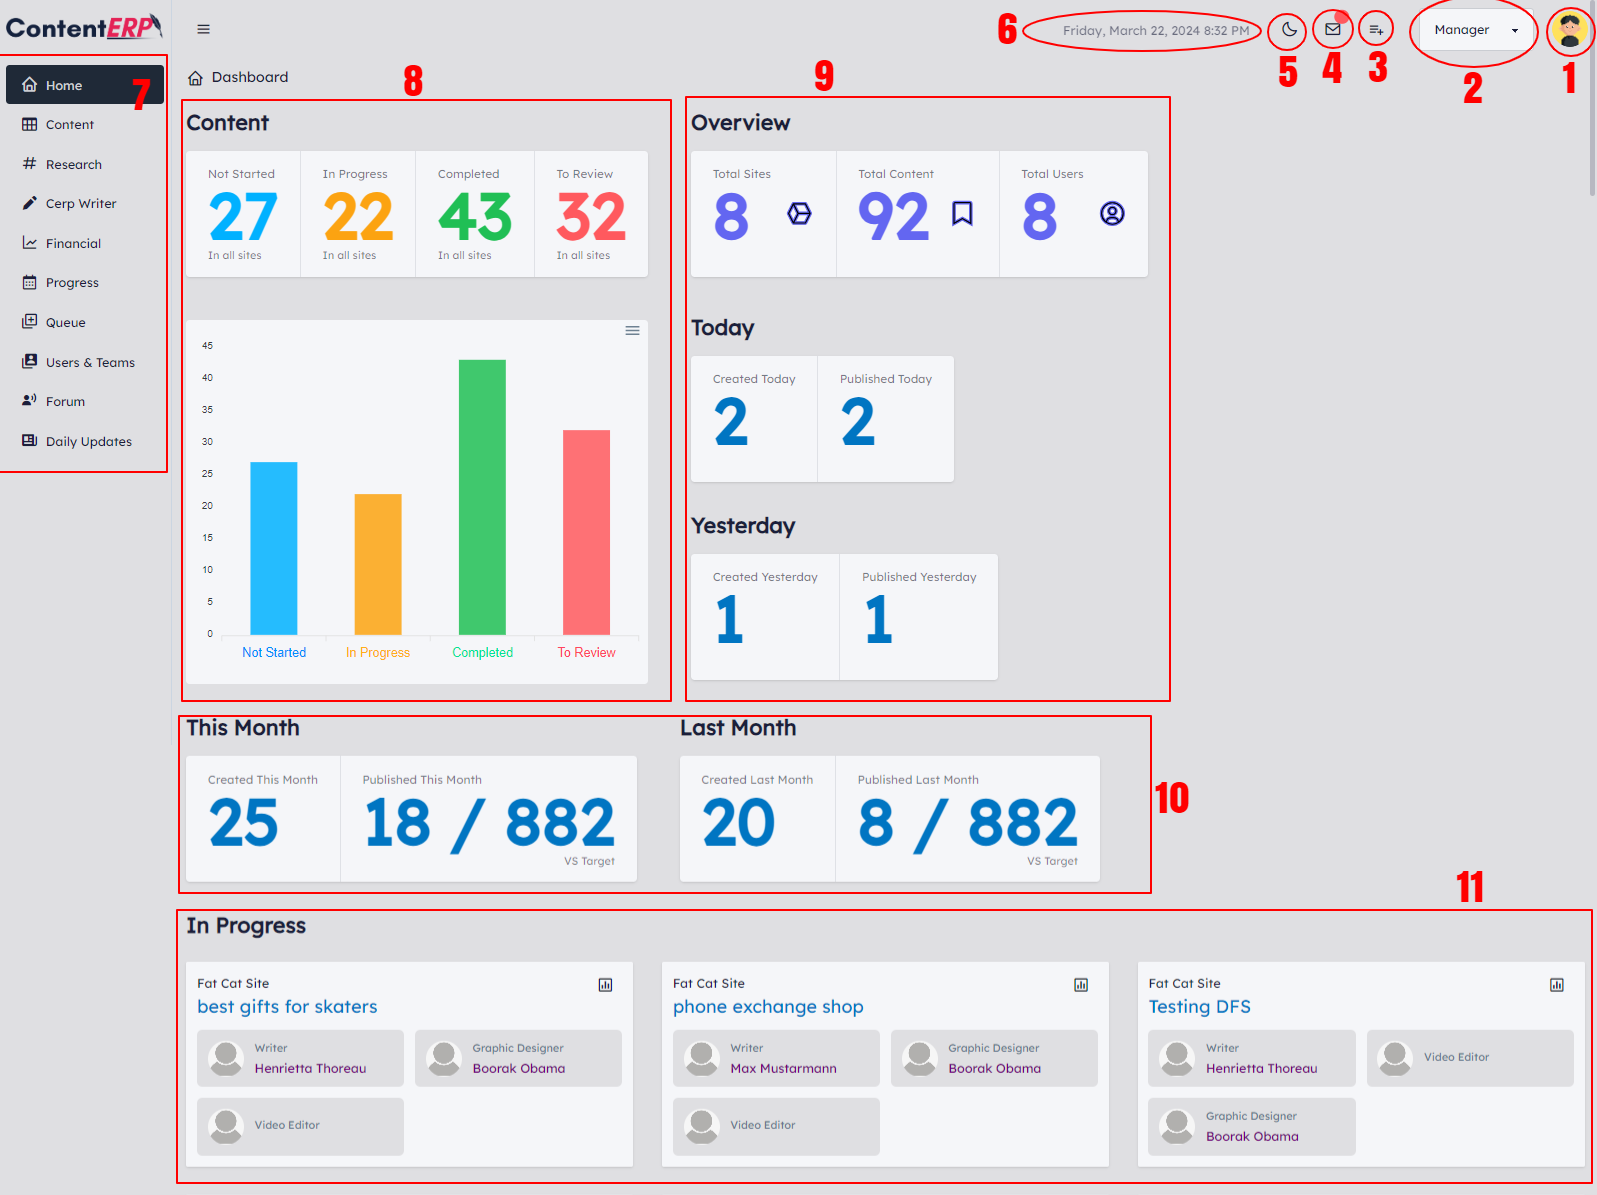 Overview of the ContentERP Dashboard